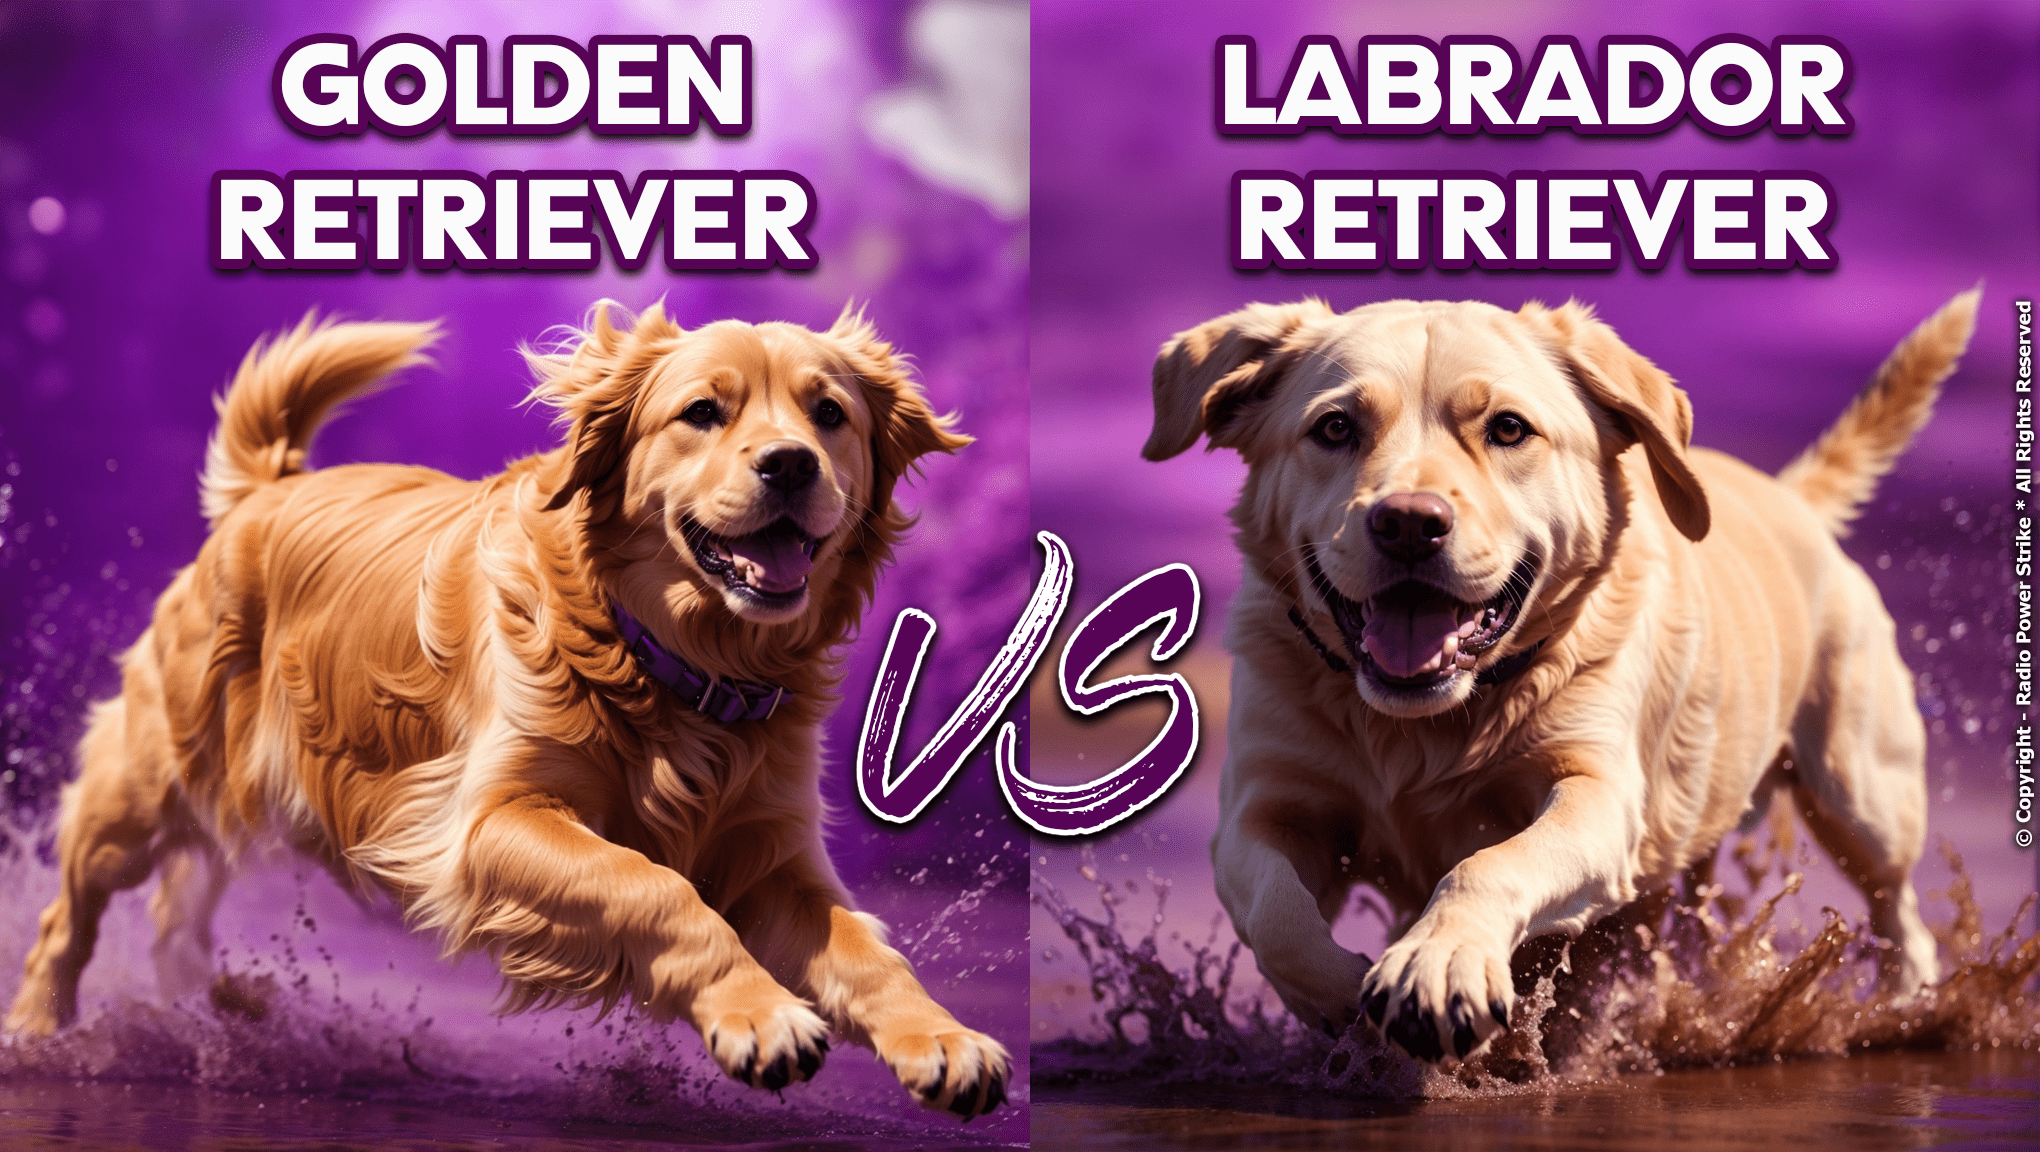 What is the Difference Between Labrador and Golden Retriever?